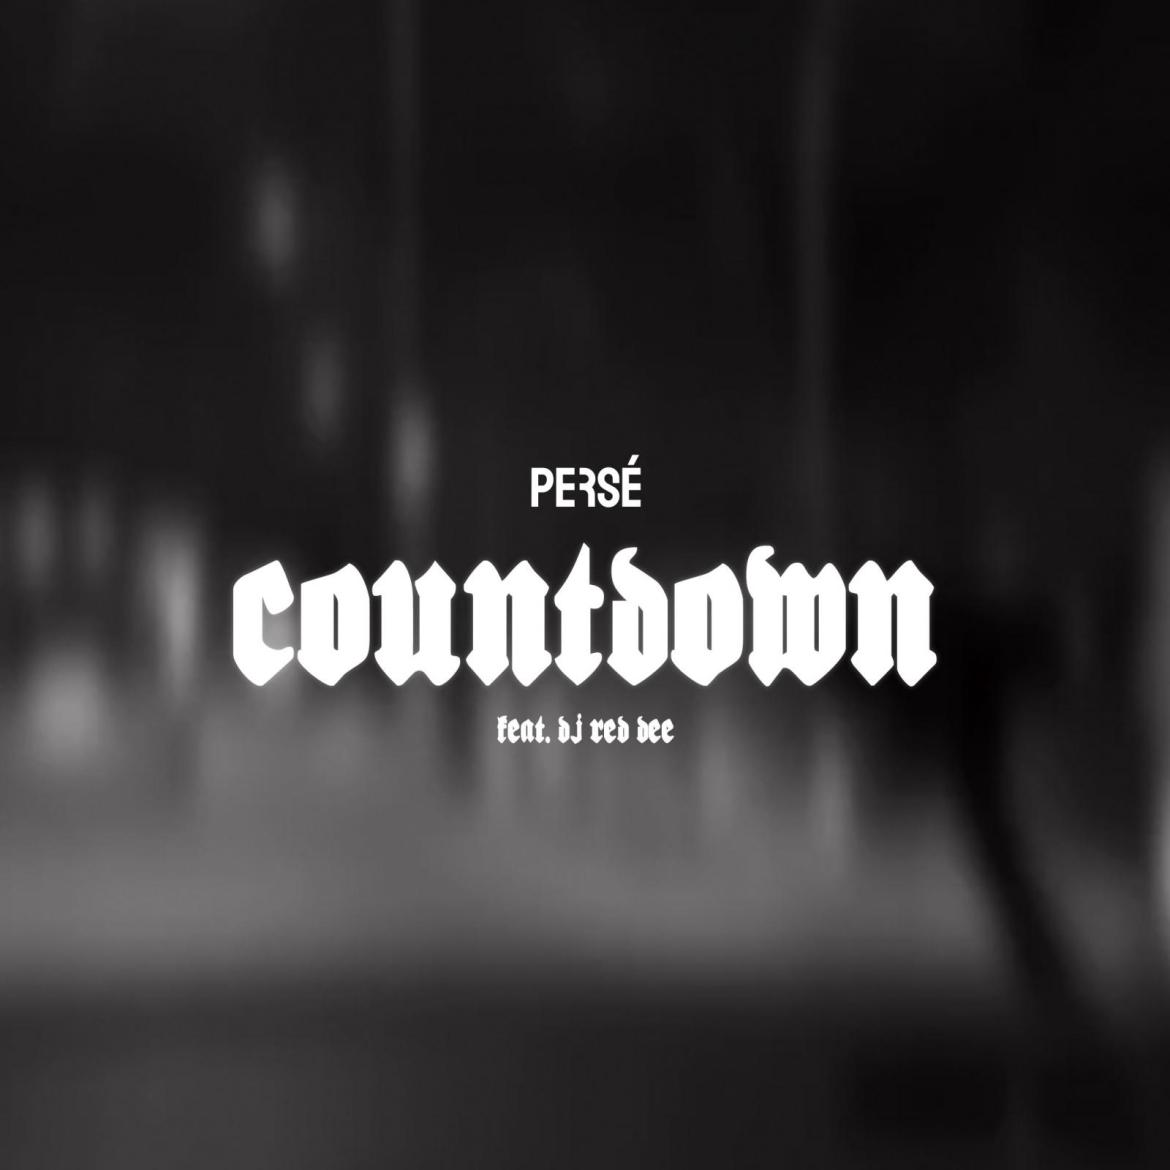 Persé DJ red DEE Countdown Cover